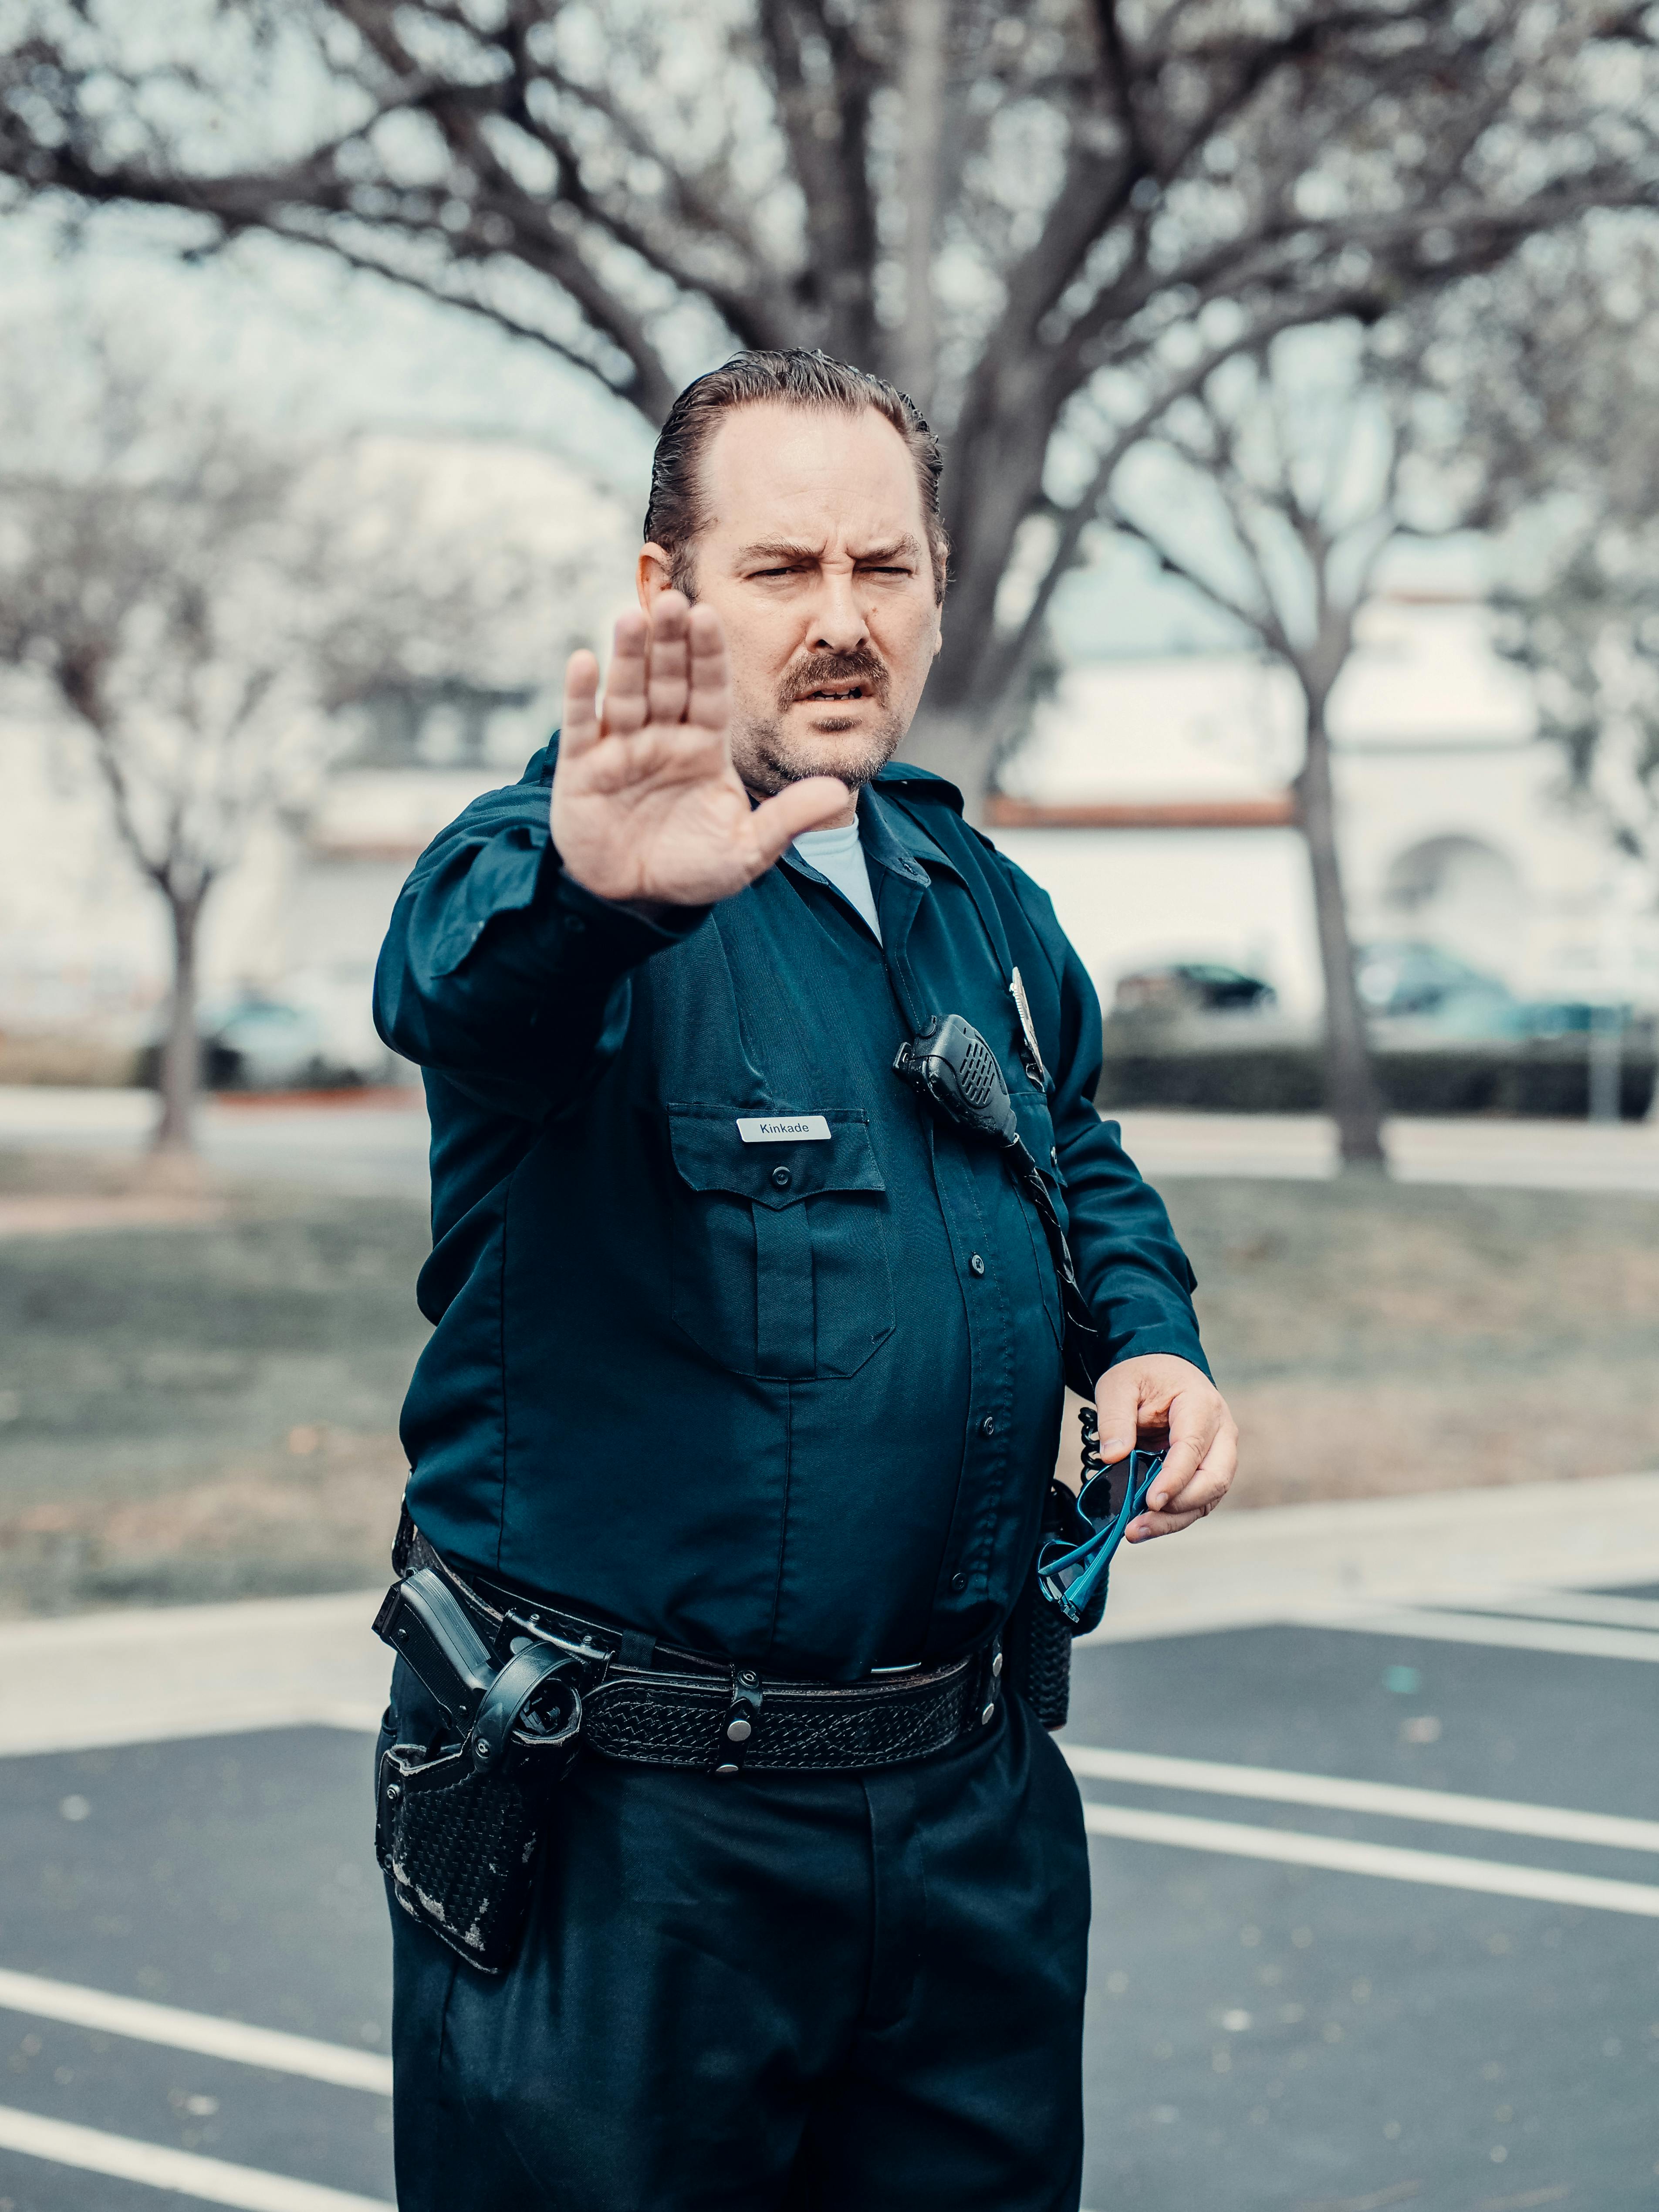 A policeman stopping someone | Source: Pexels